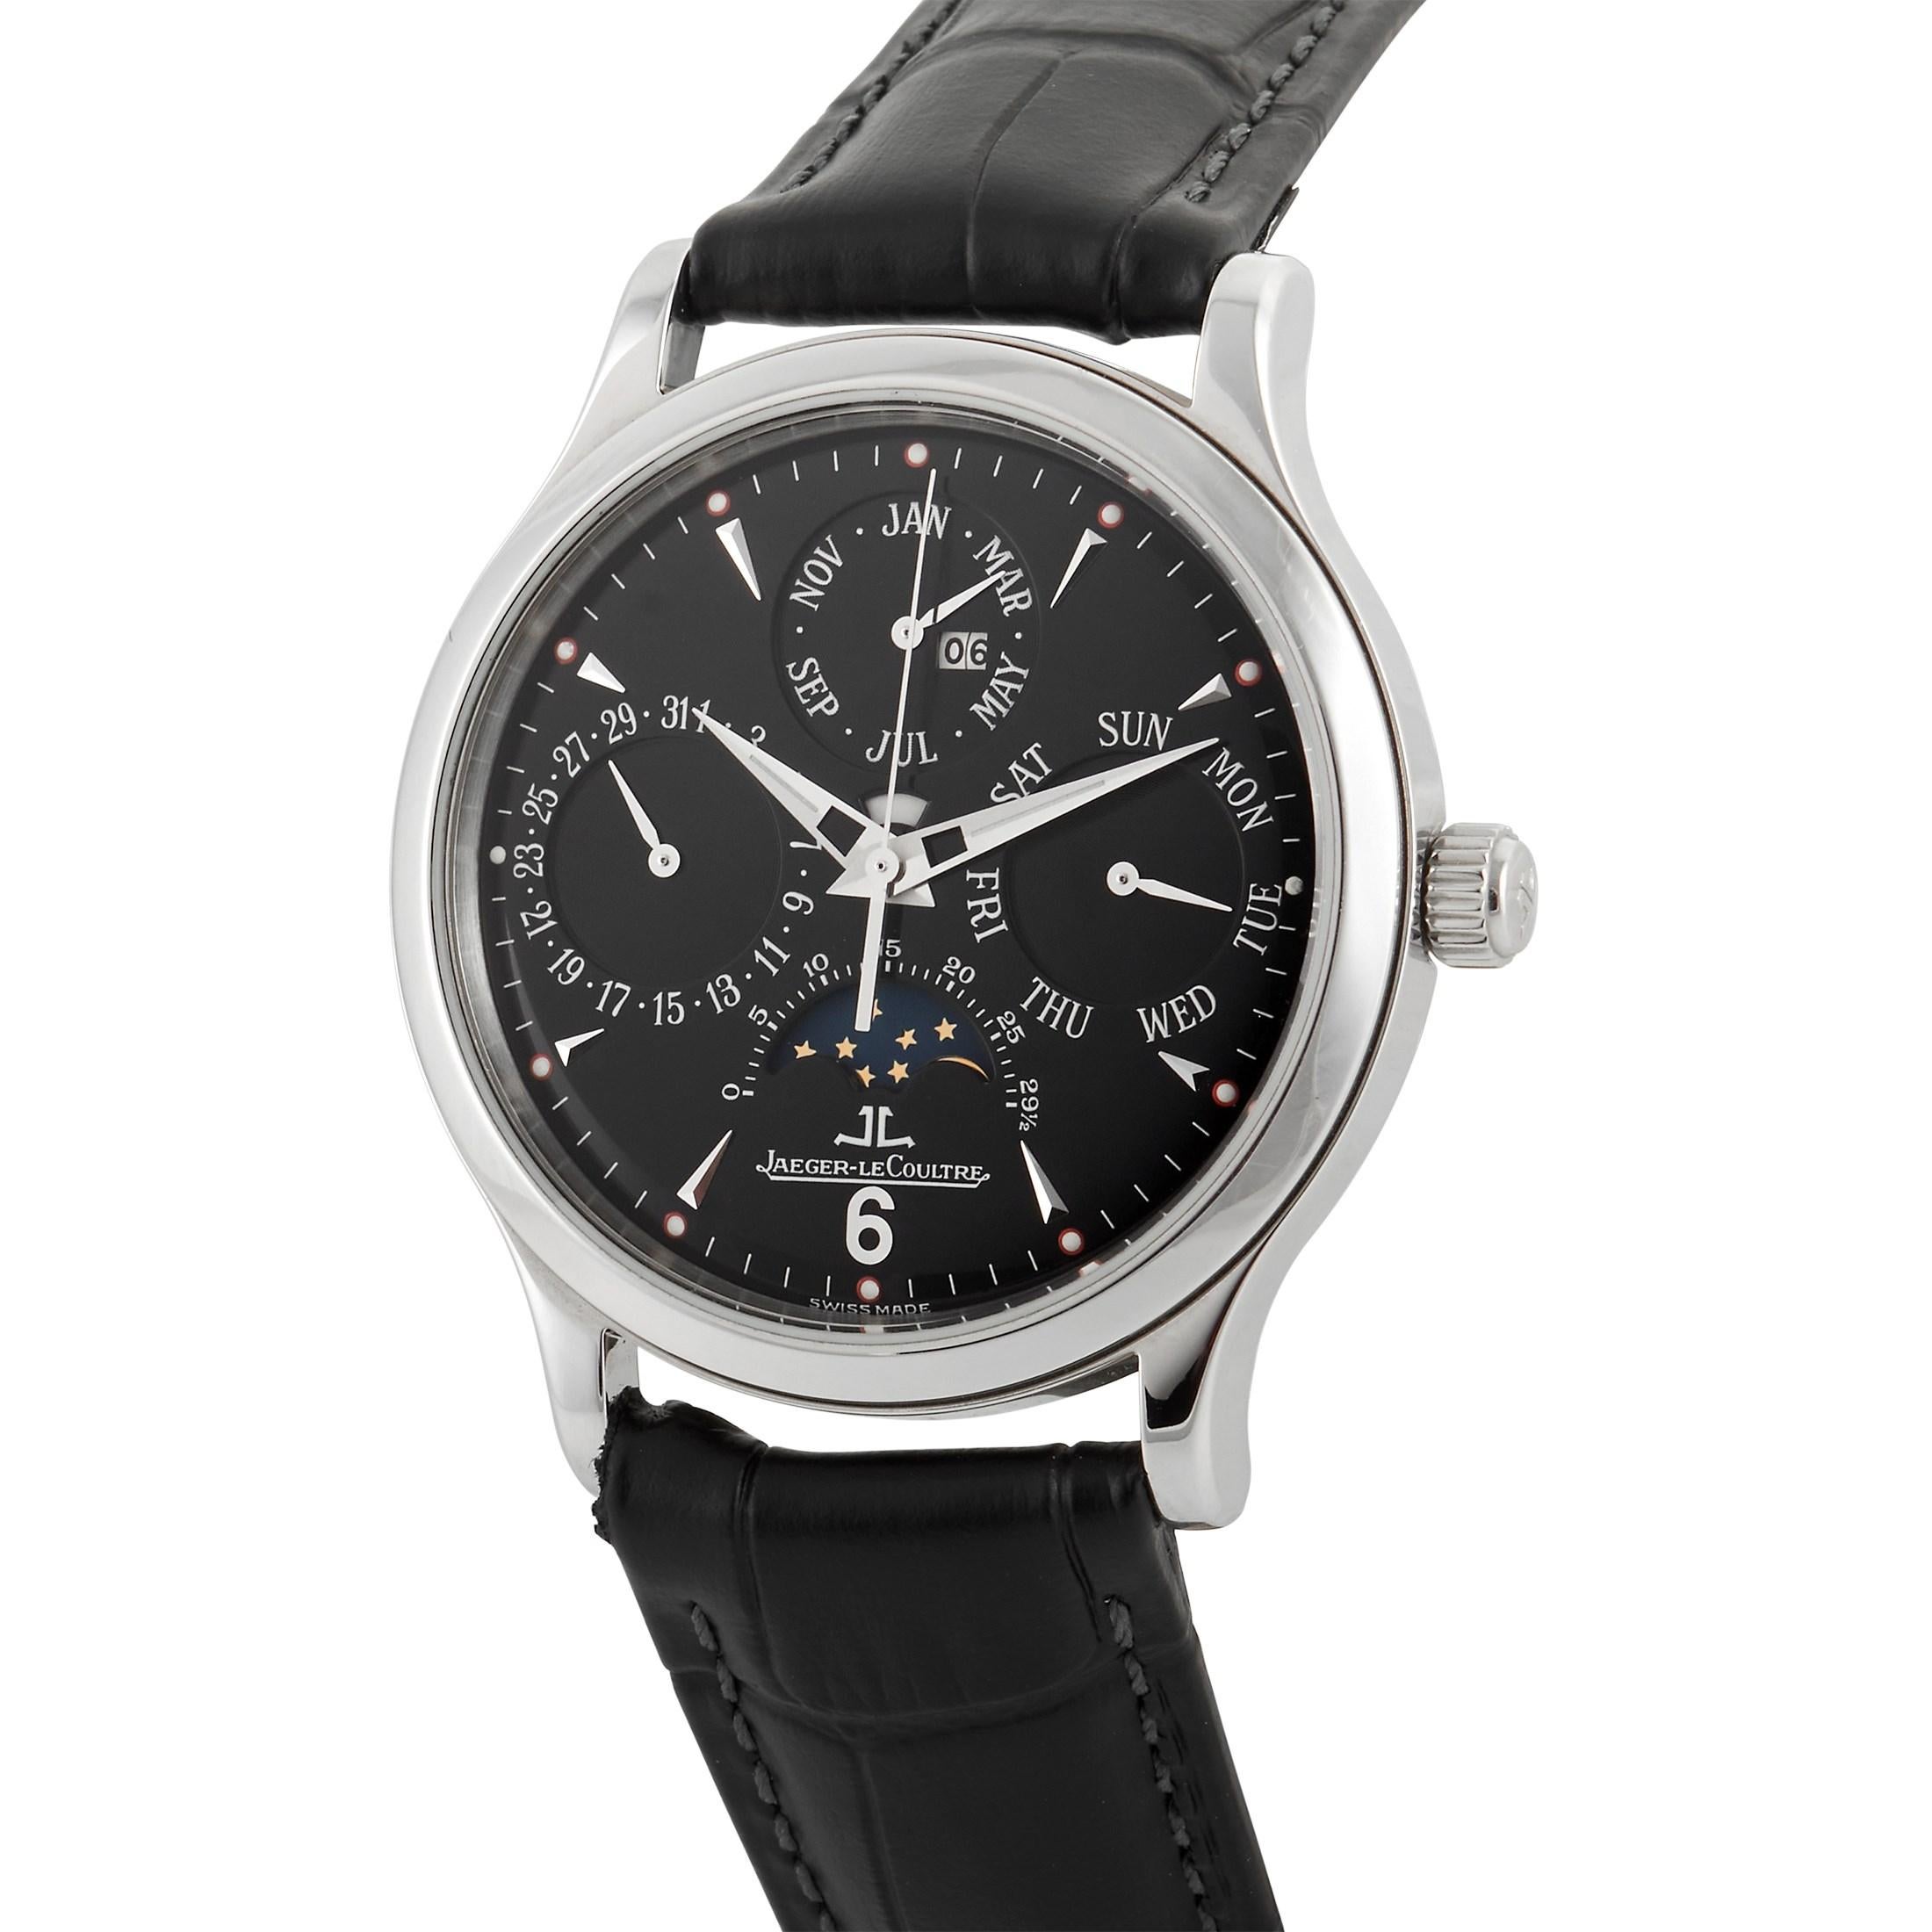 The Jaeger-LeCoultre Master Perpetual Watch, reference number 149847A, upholds the storied brand’s commitment to quality and craftsmanship.

Unique and sophisticated, this watch pairs a 37mm case made from stainless steel with a black crocodile